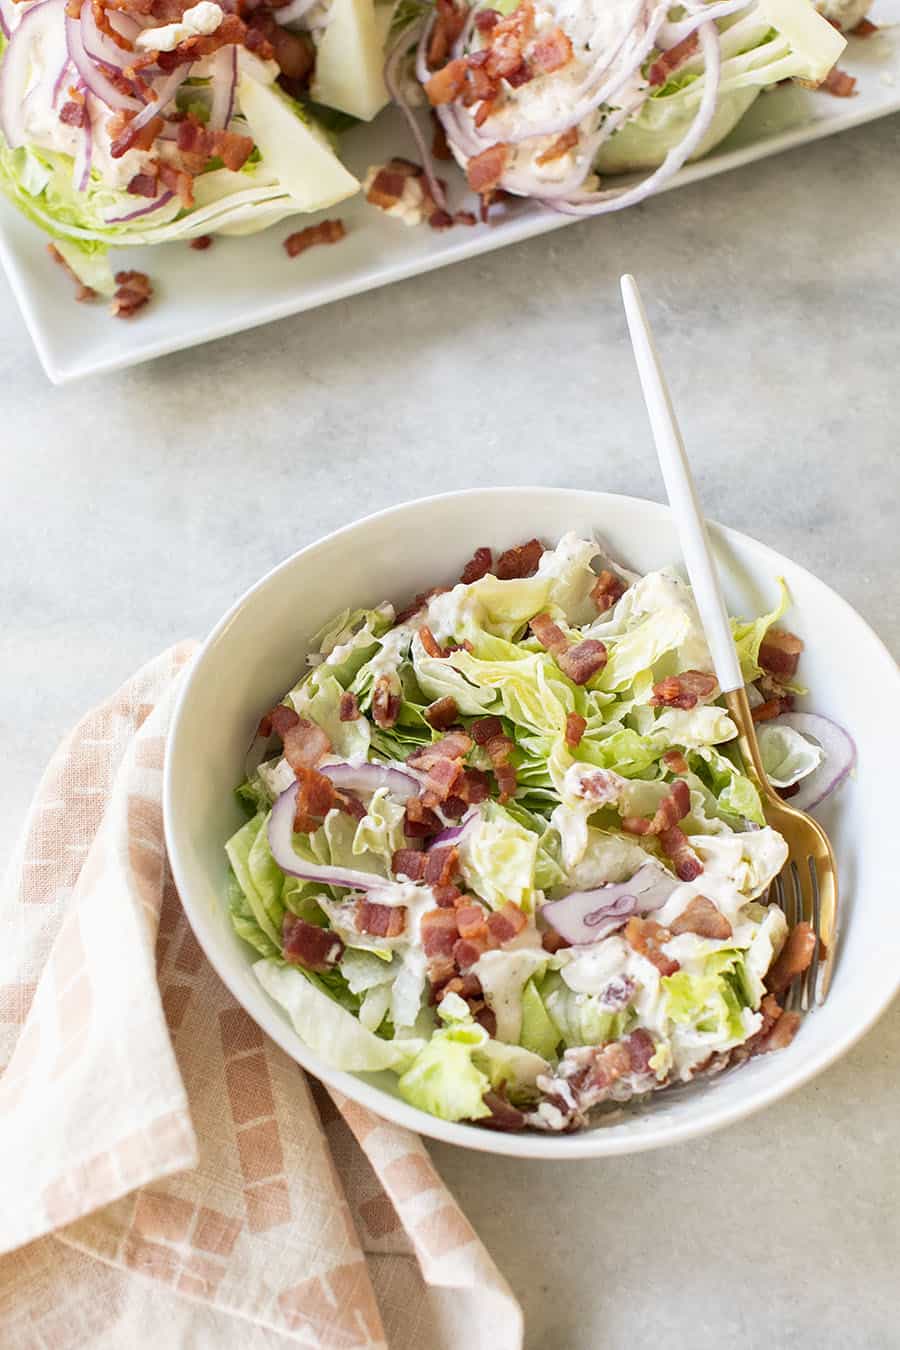 Wedge salad in a white bowl chopped.